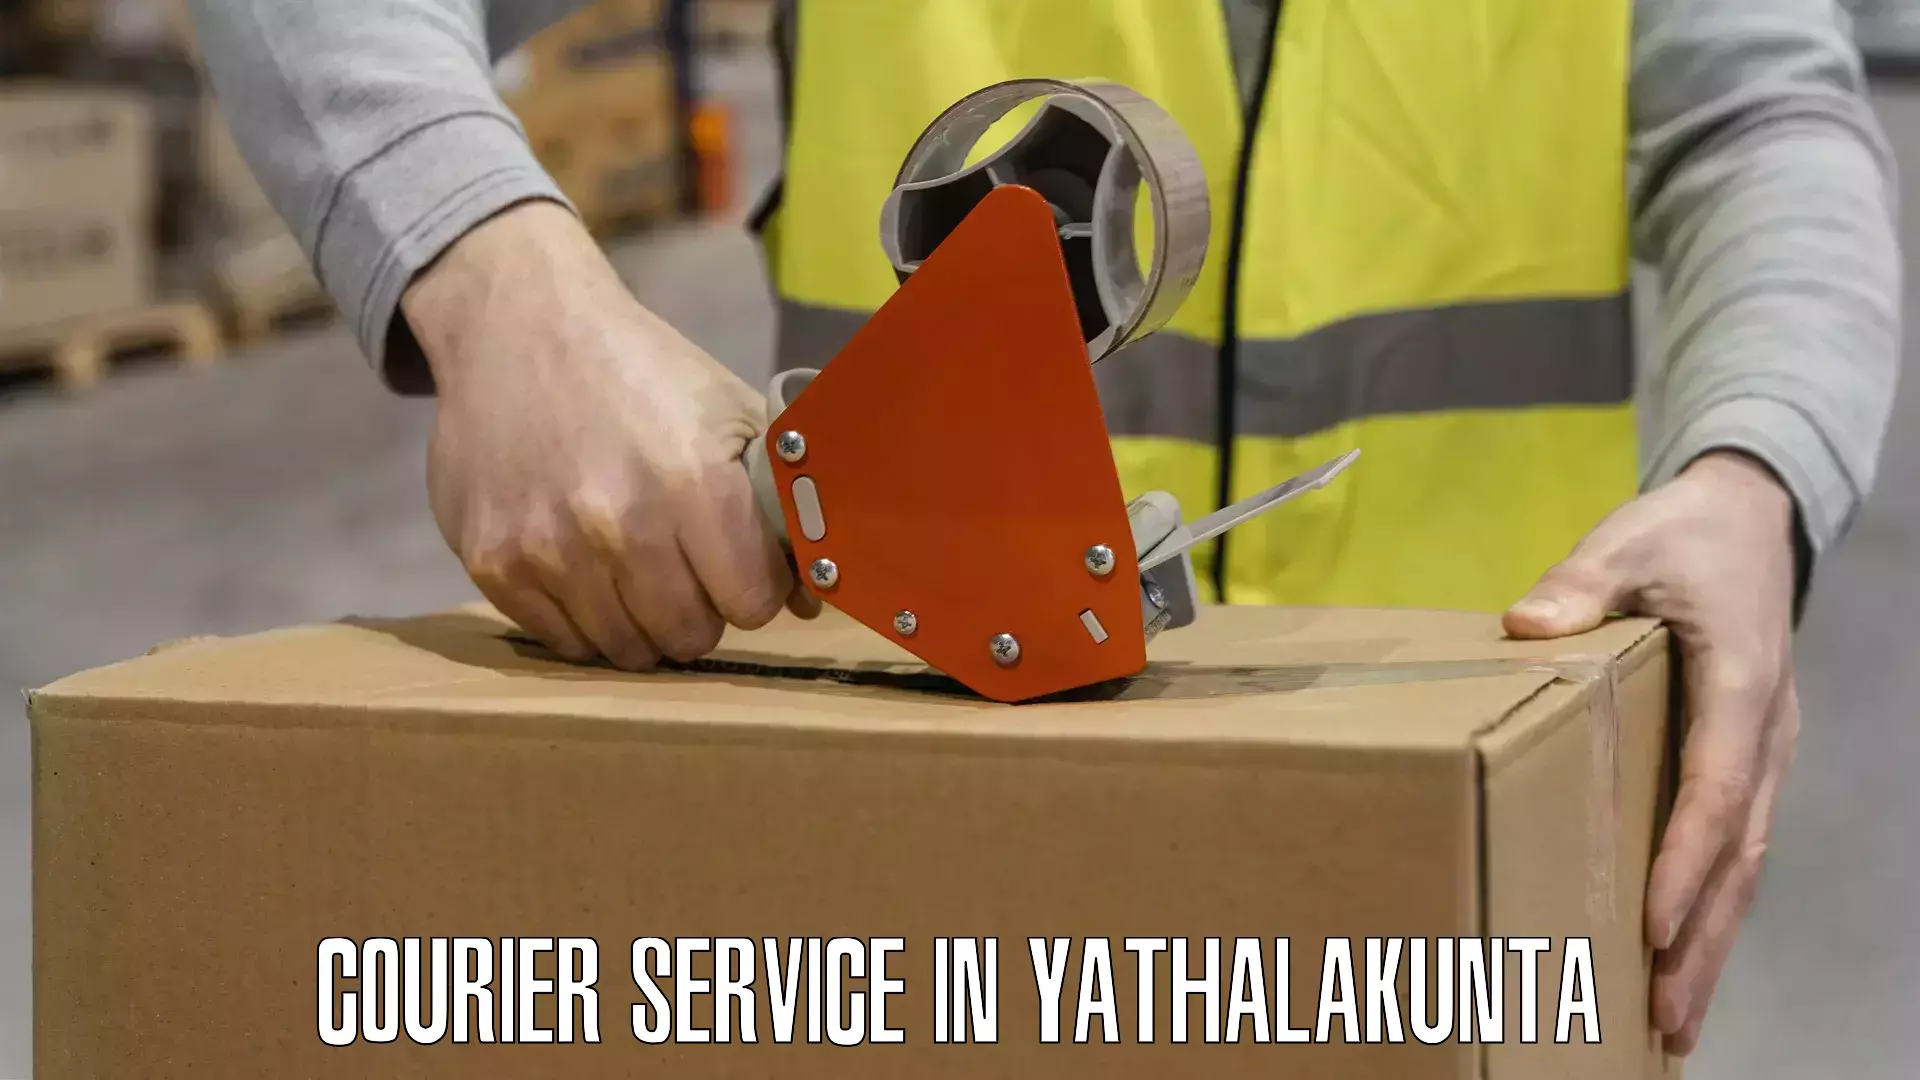 Business delivery service in Yathalakunta